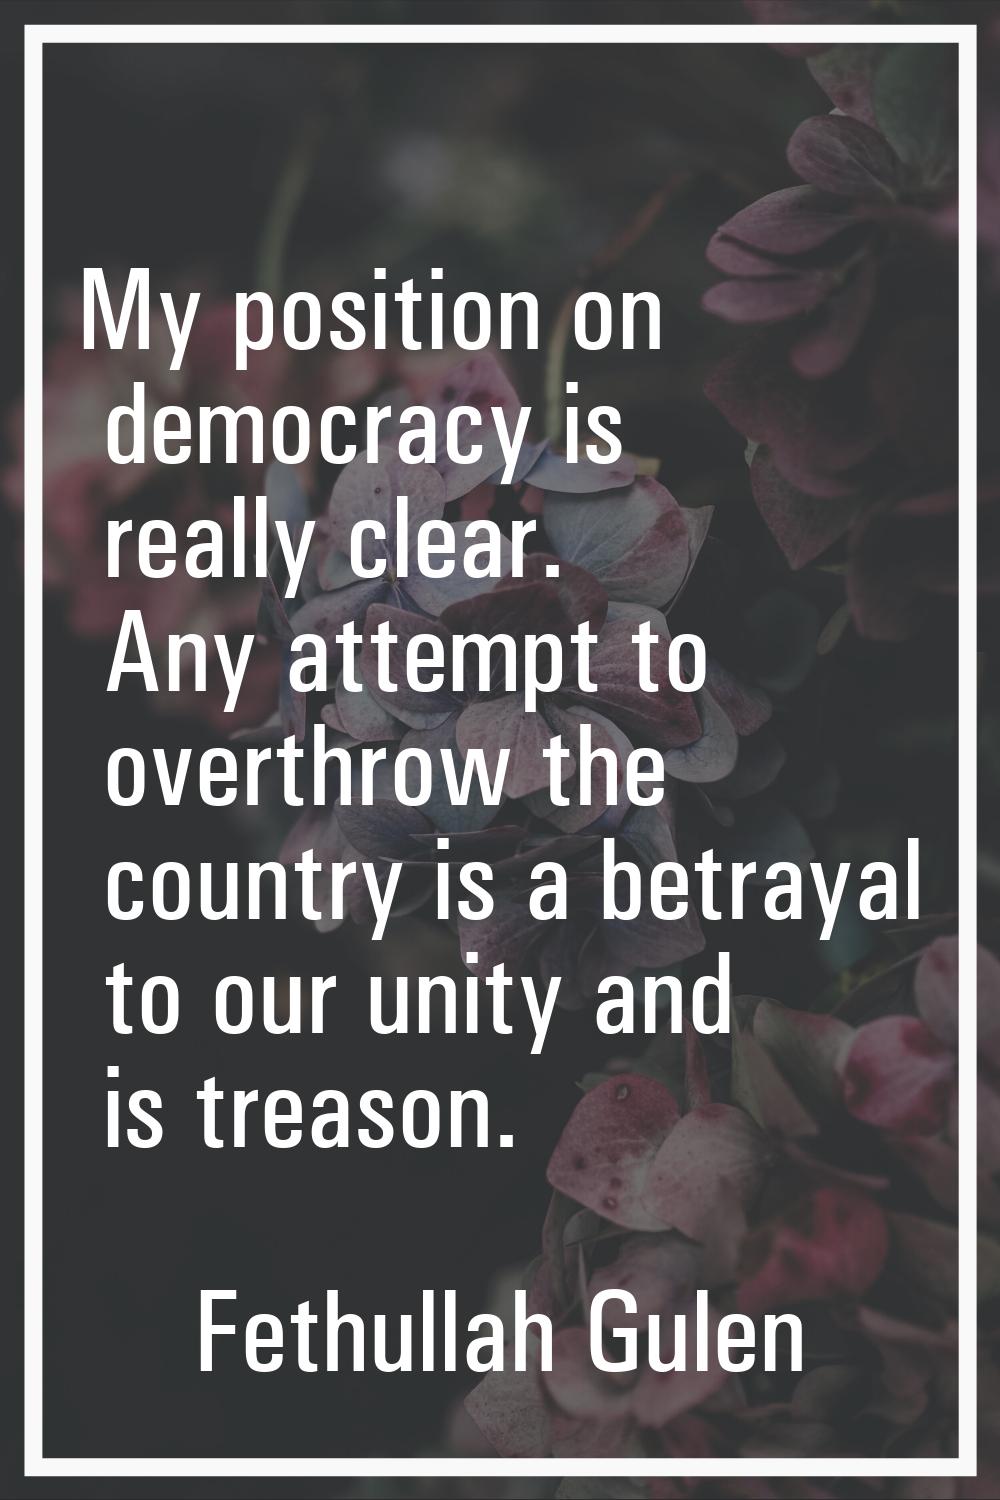 My position on democracy is really clear. Any attempt to overthrow the country is a betrayal to our